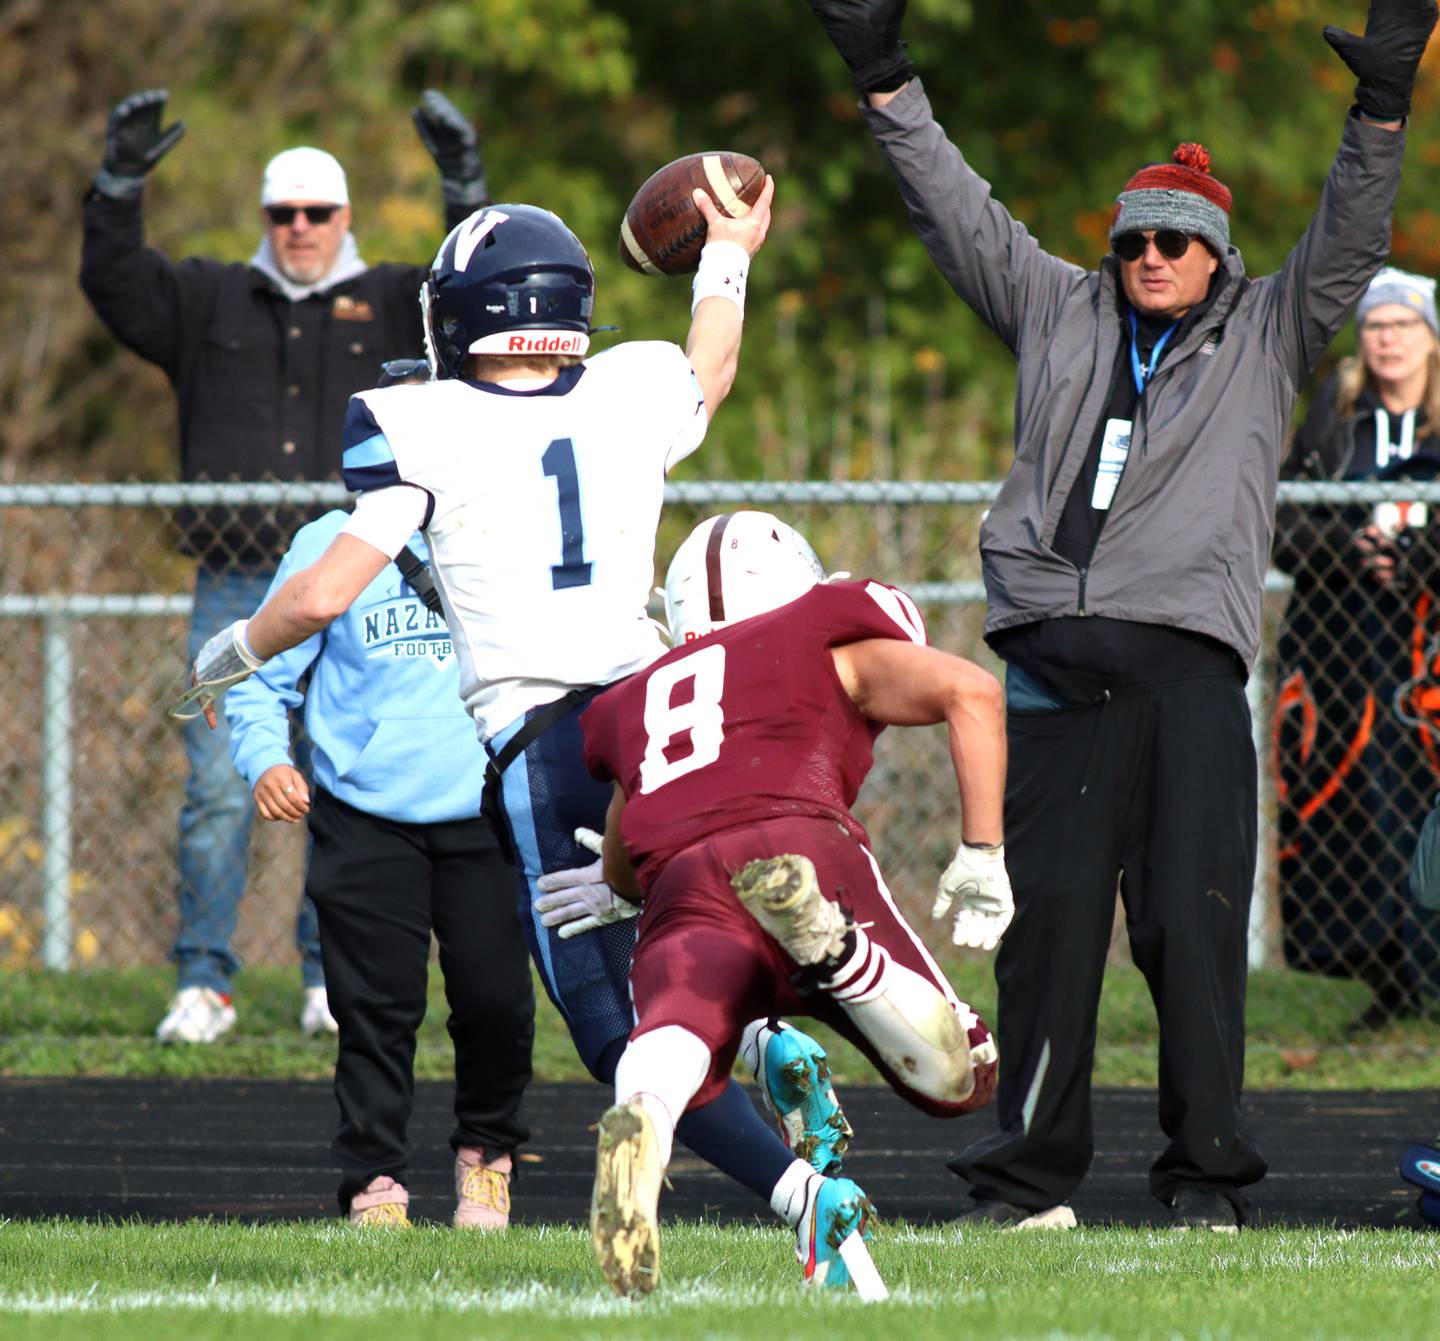 Nazareth’s Logan Malachuk (1) storms into the end zone with a touchdown in first-round Class 5A playoff football action at Crystal Lake Saturday.